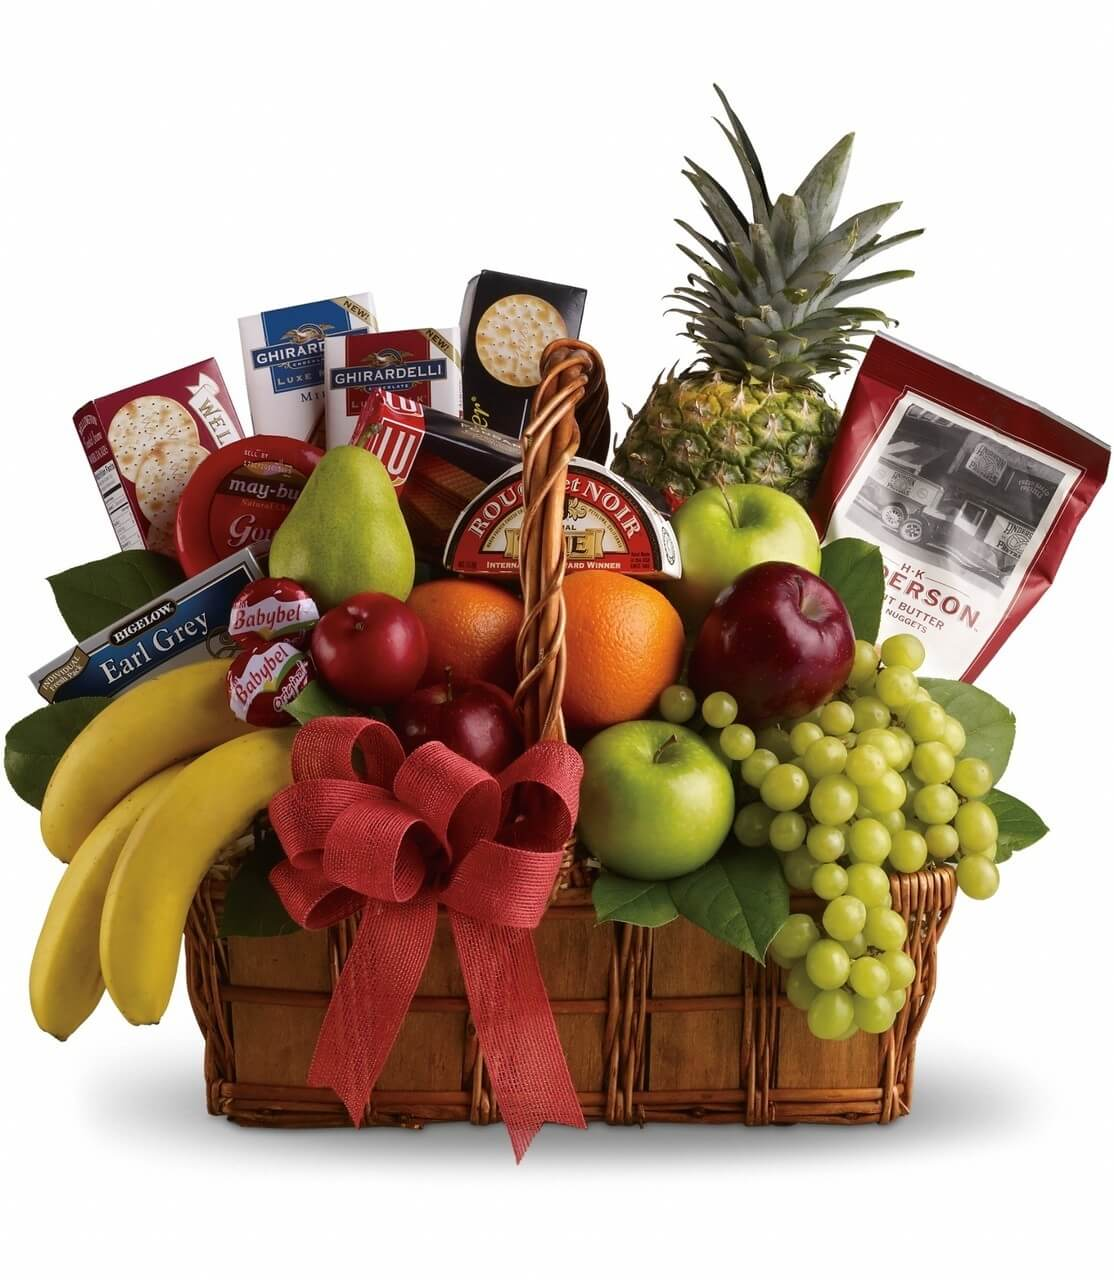 Fruits are popular in the Tet gift list